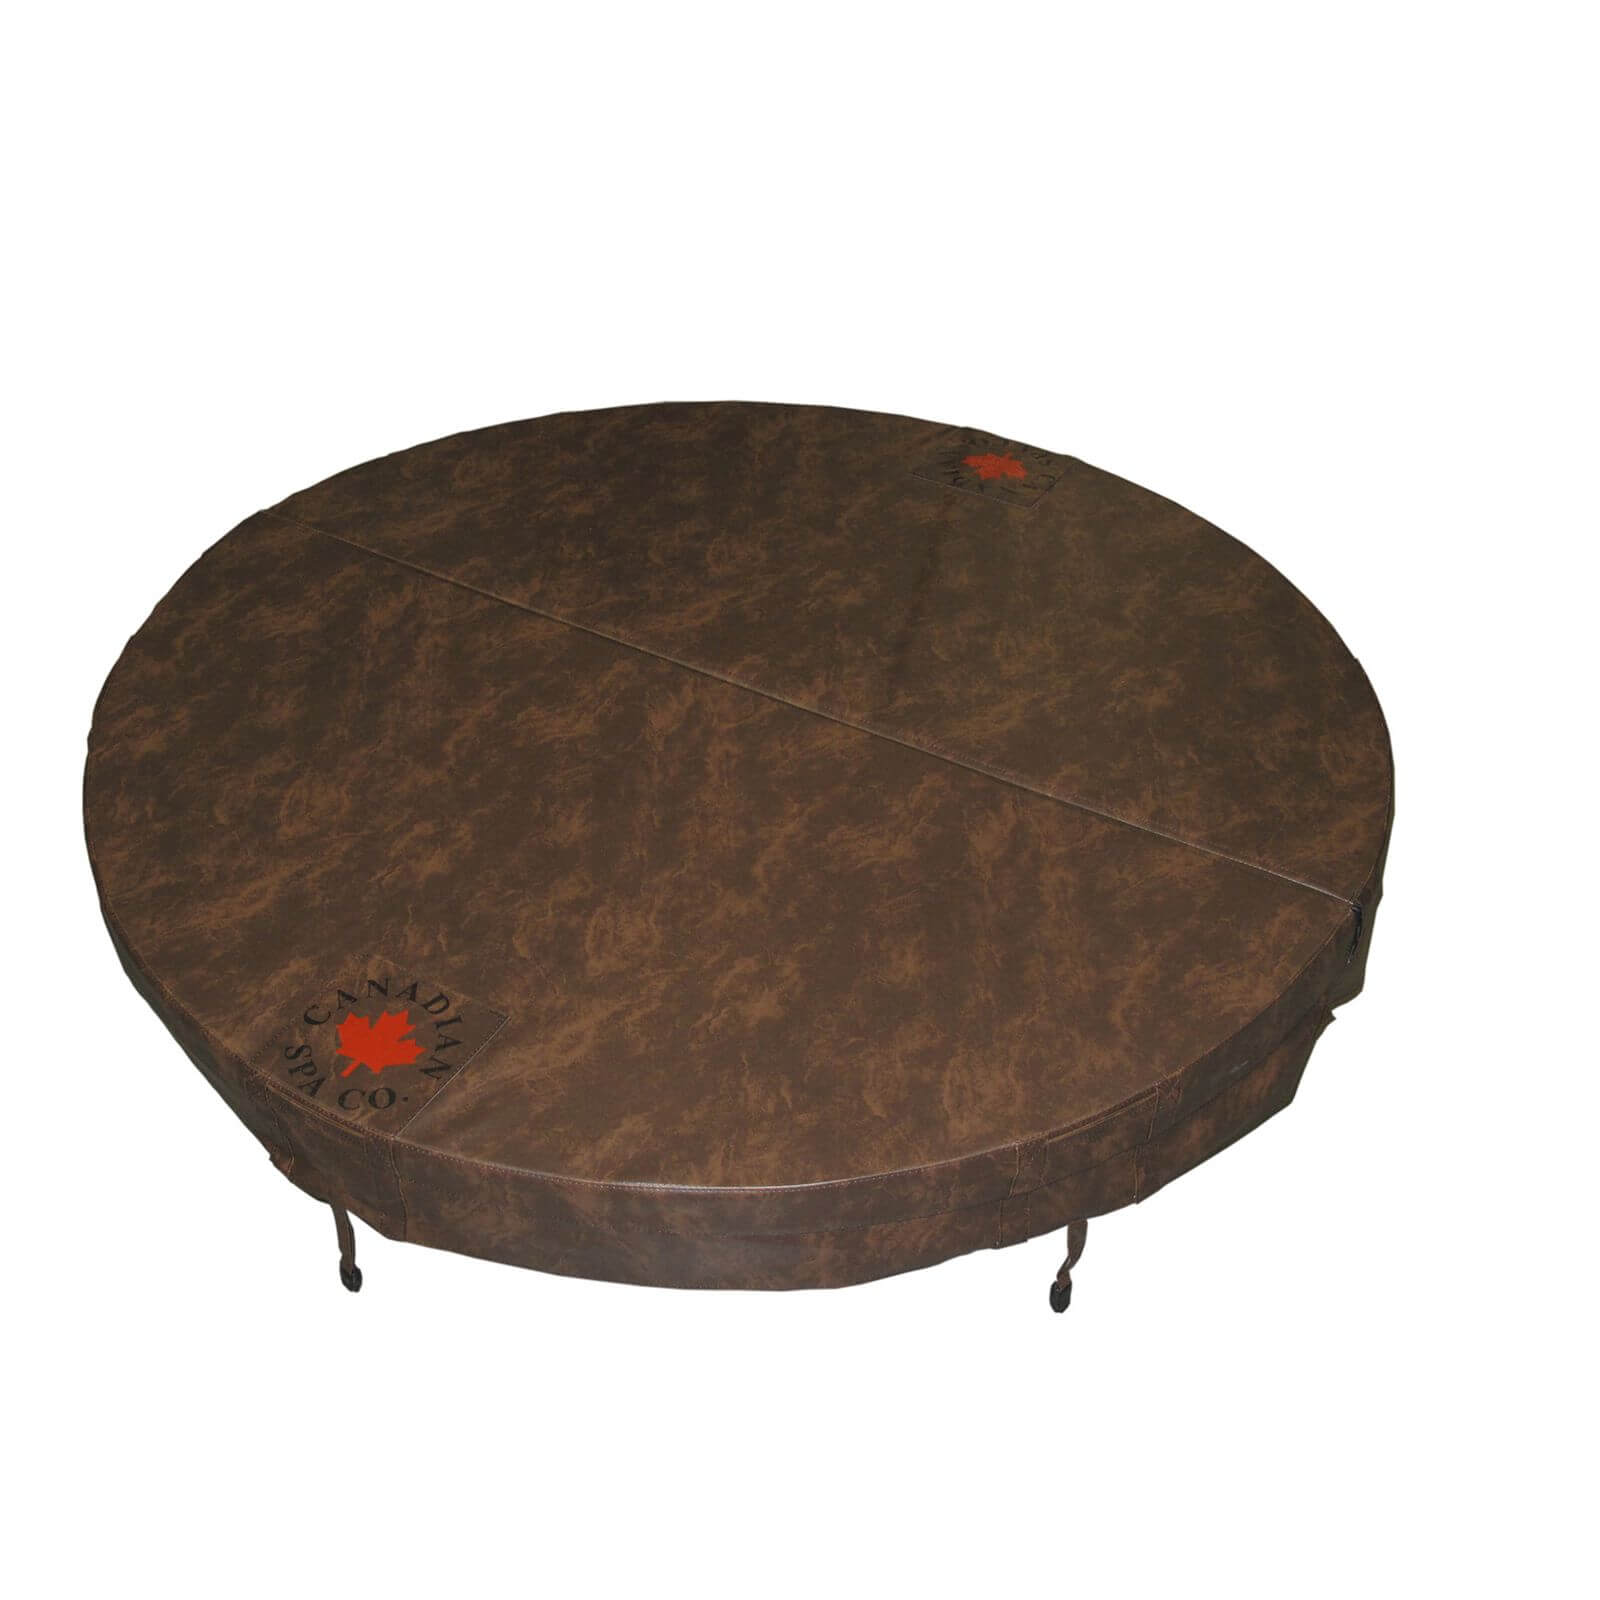 Photo of Canadian Spa Round Hot Tub Cover - Brown / 203cm Diameter